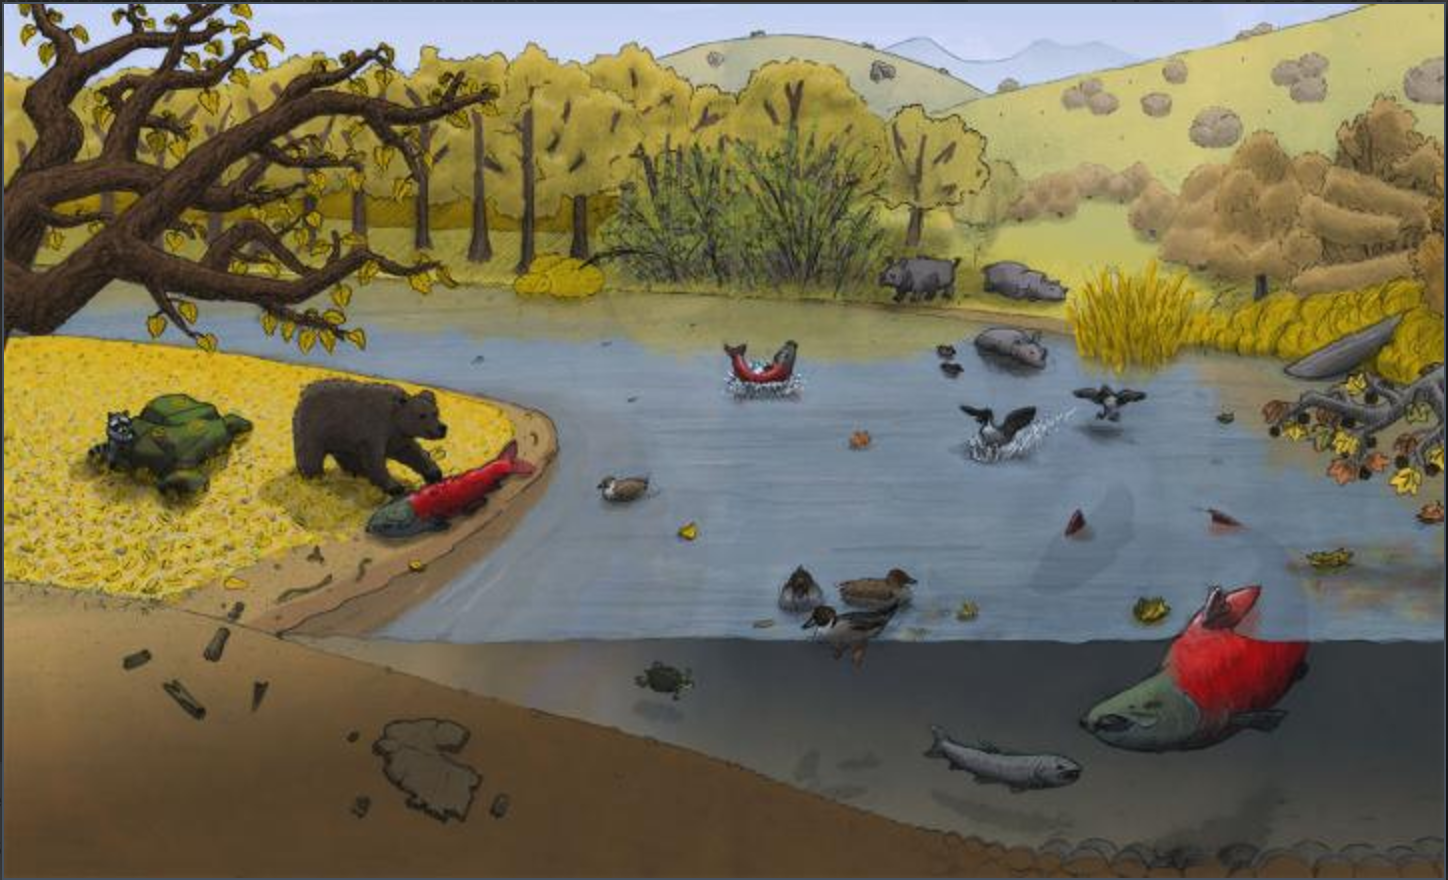 Painting of a bear standing over a 400 lb salmon